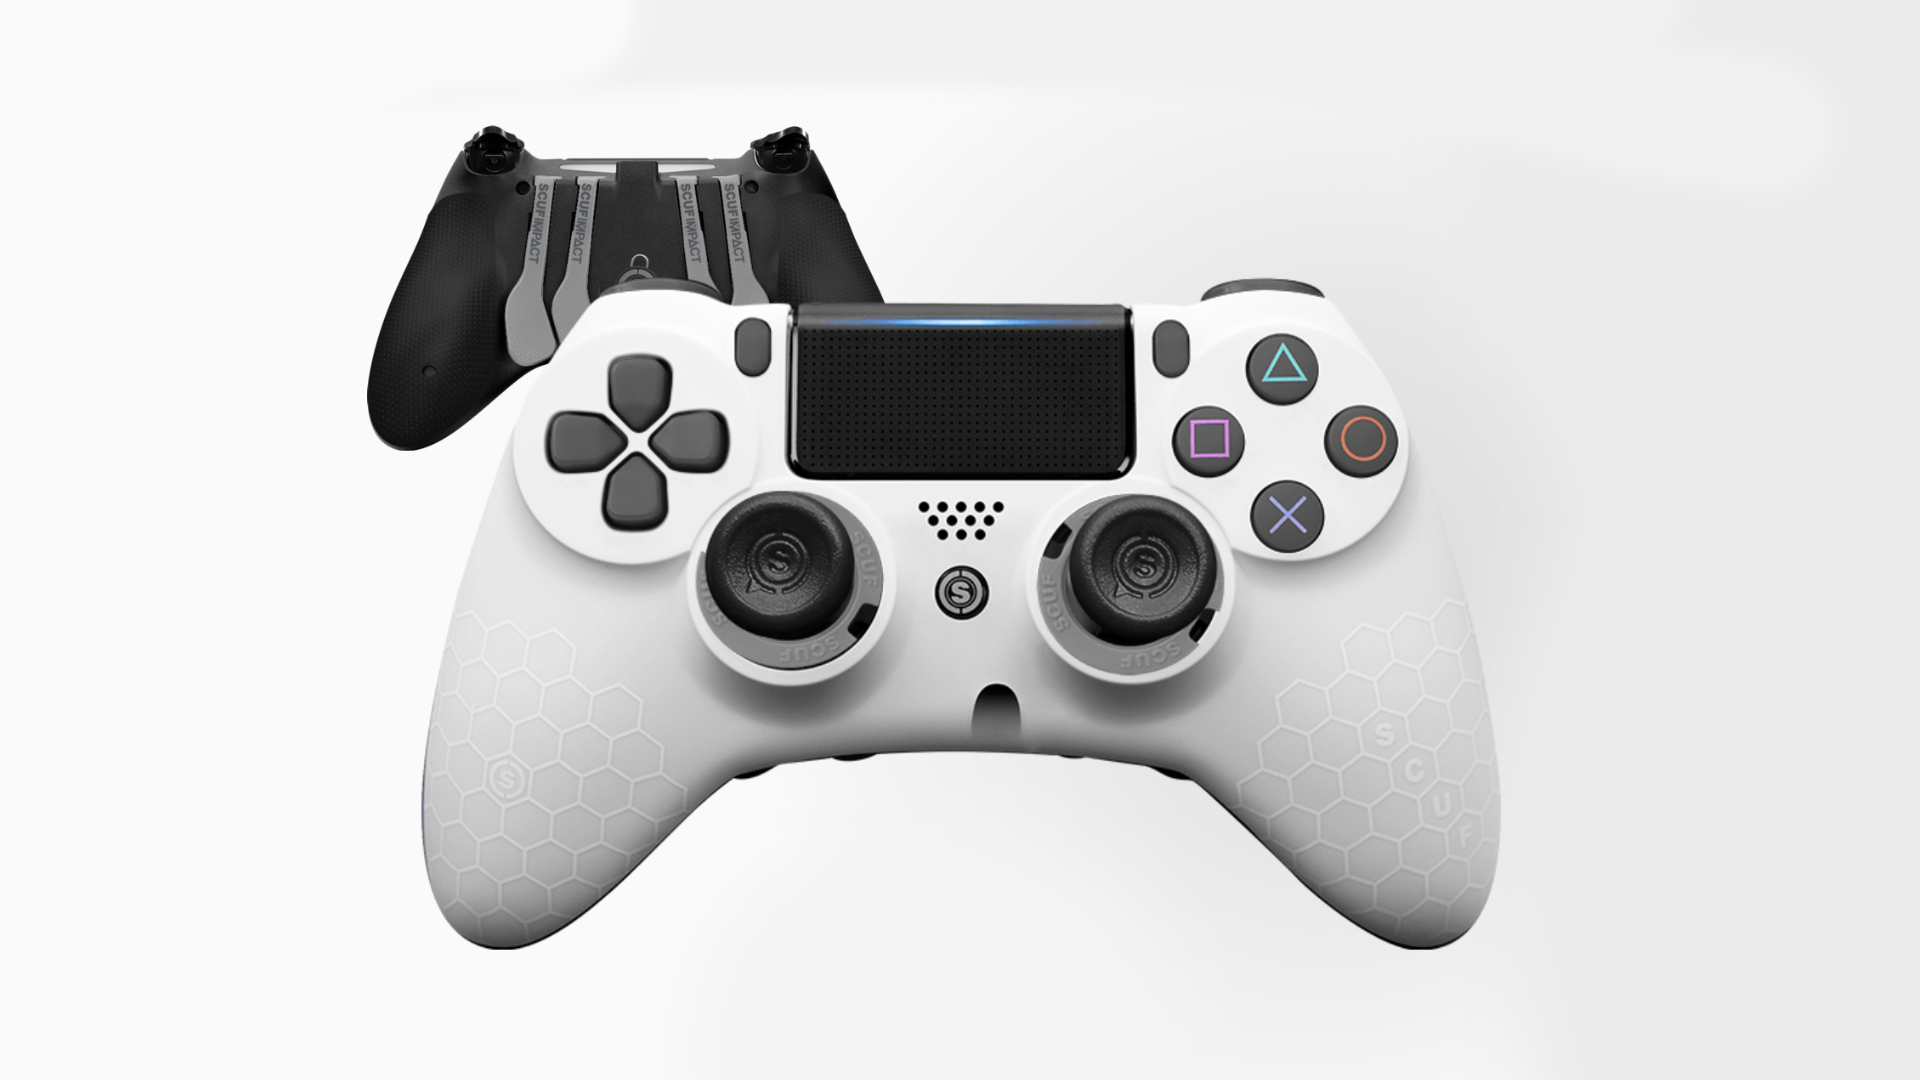 SCUF announces that it is working on a PS5 controller